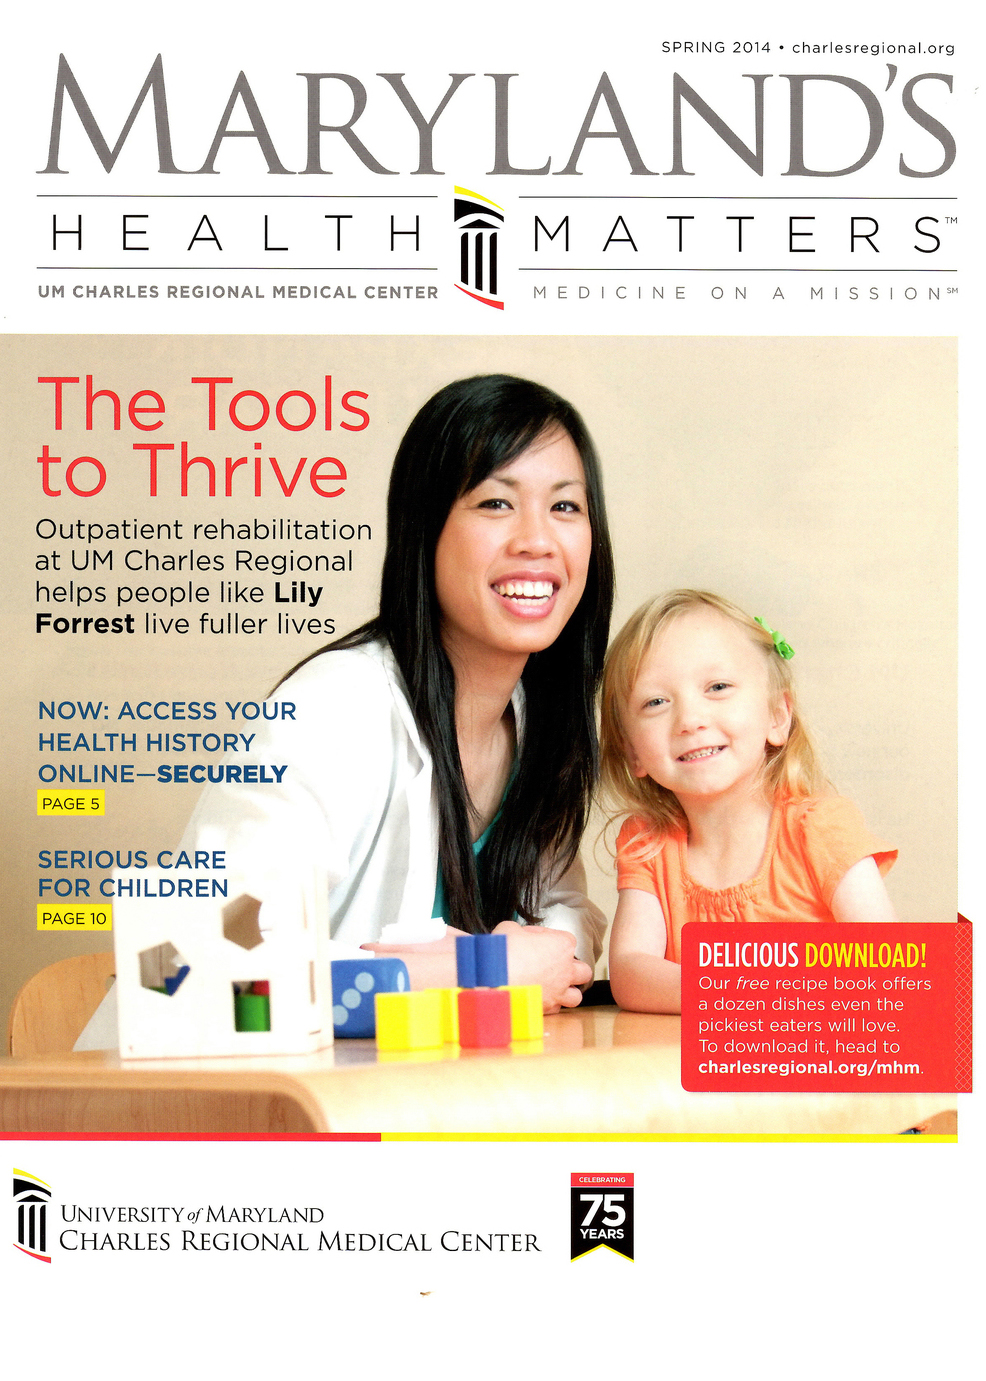 Cover photo for Maryland's Health Matters magazine.